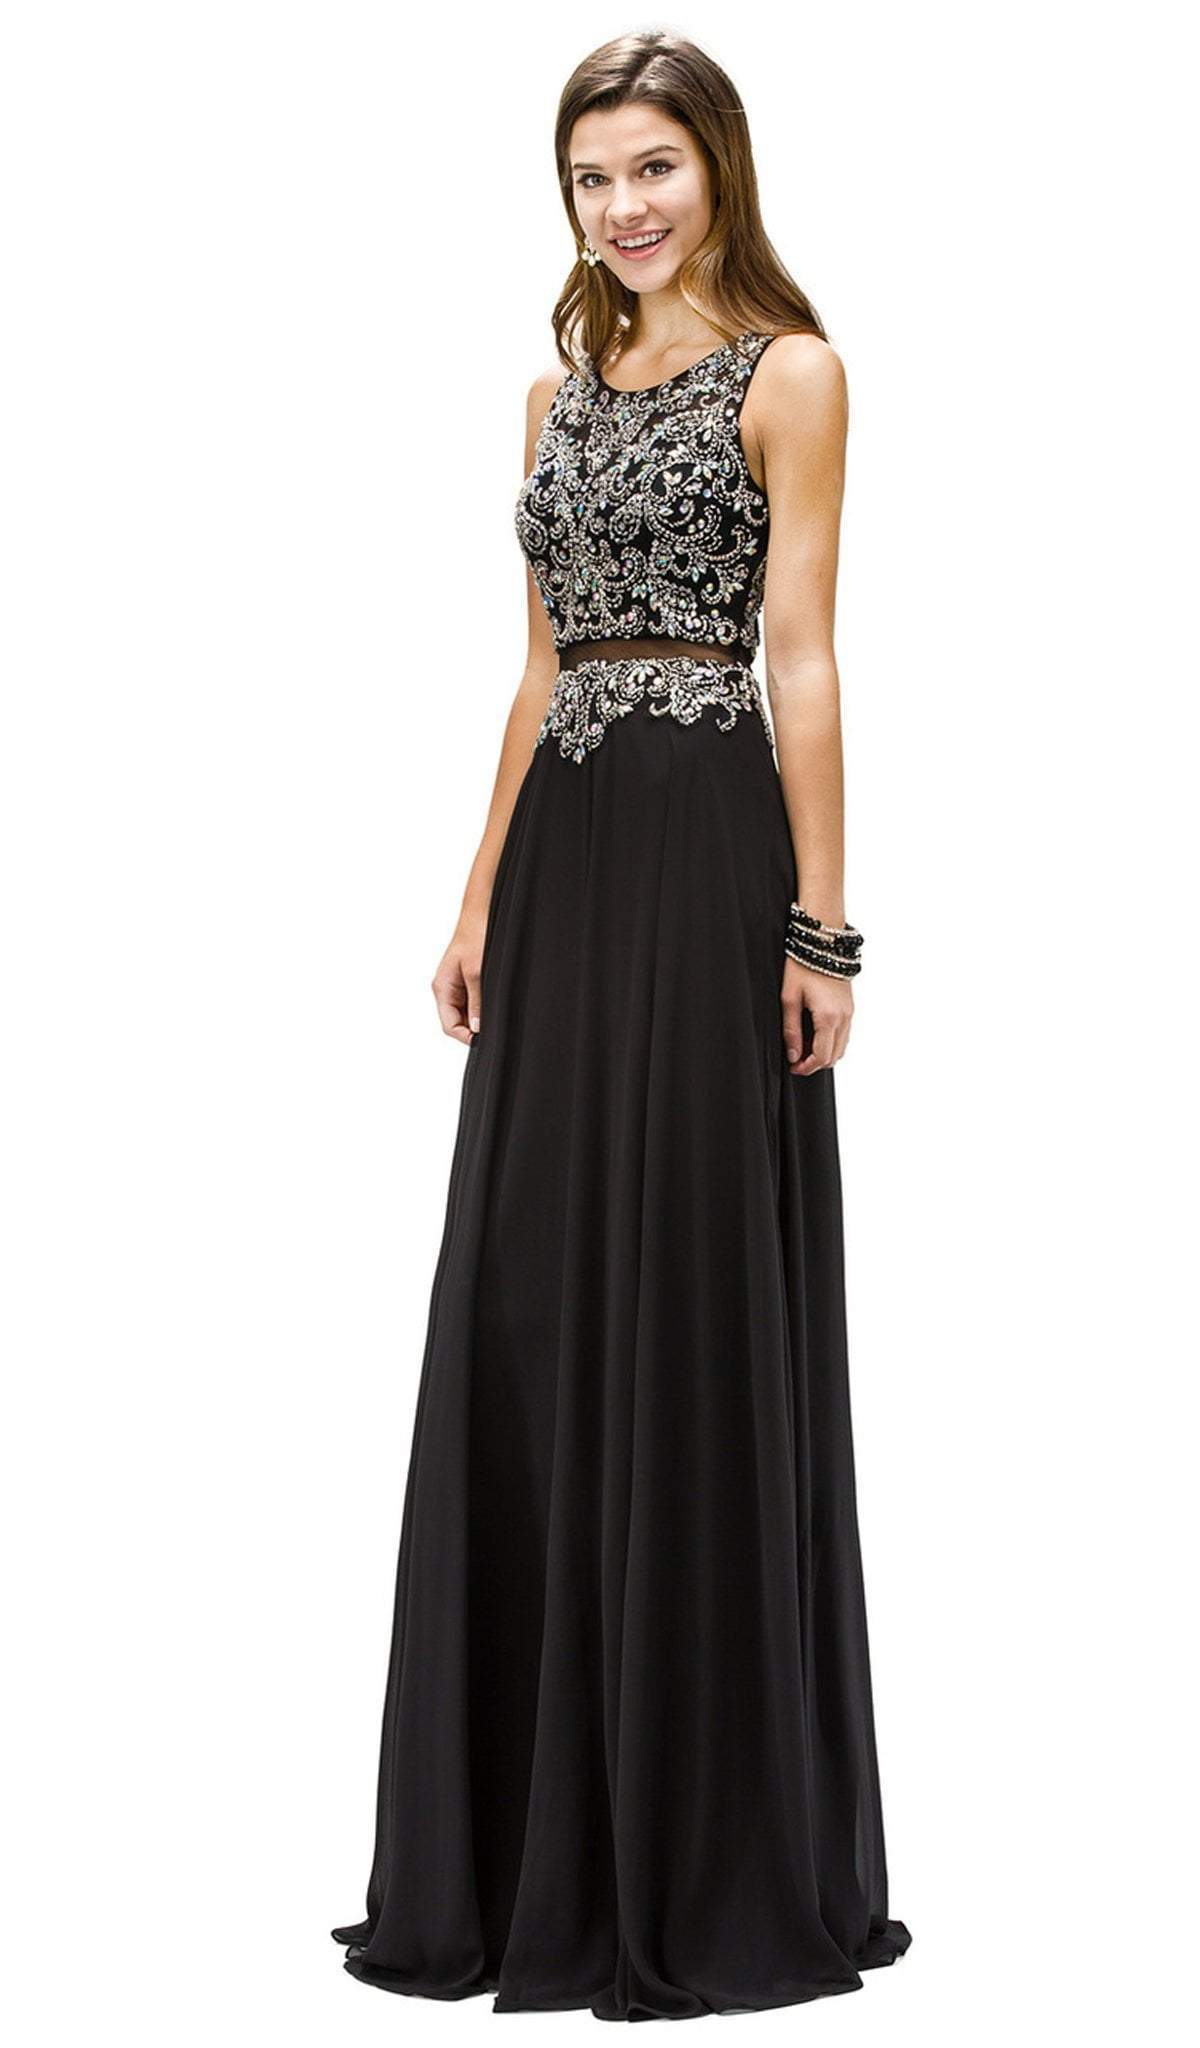 Dancing Queen - 9150 Intricately Bejeweled Illusion Two Piece- Prom Dress
